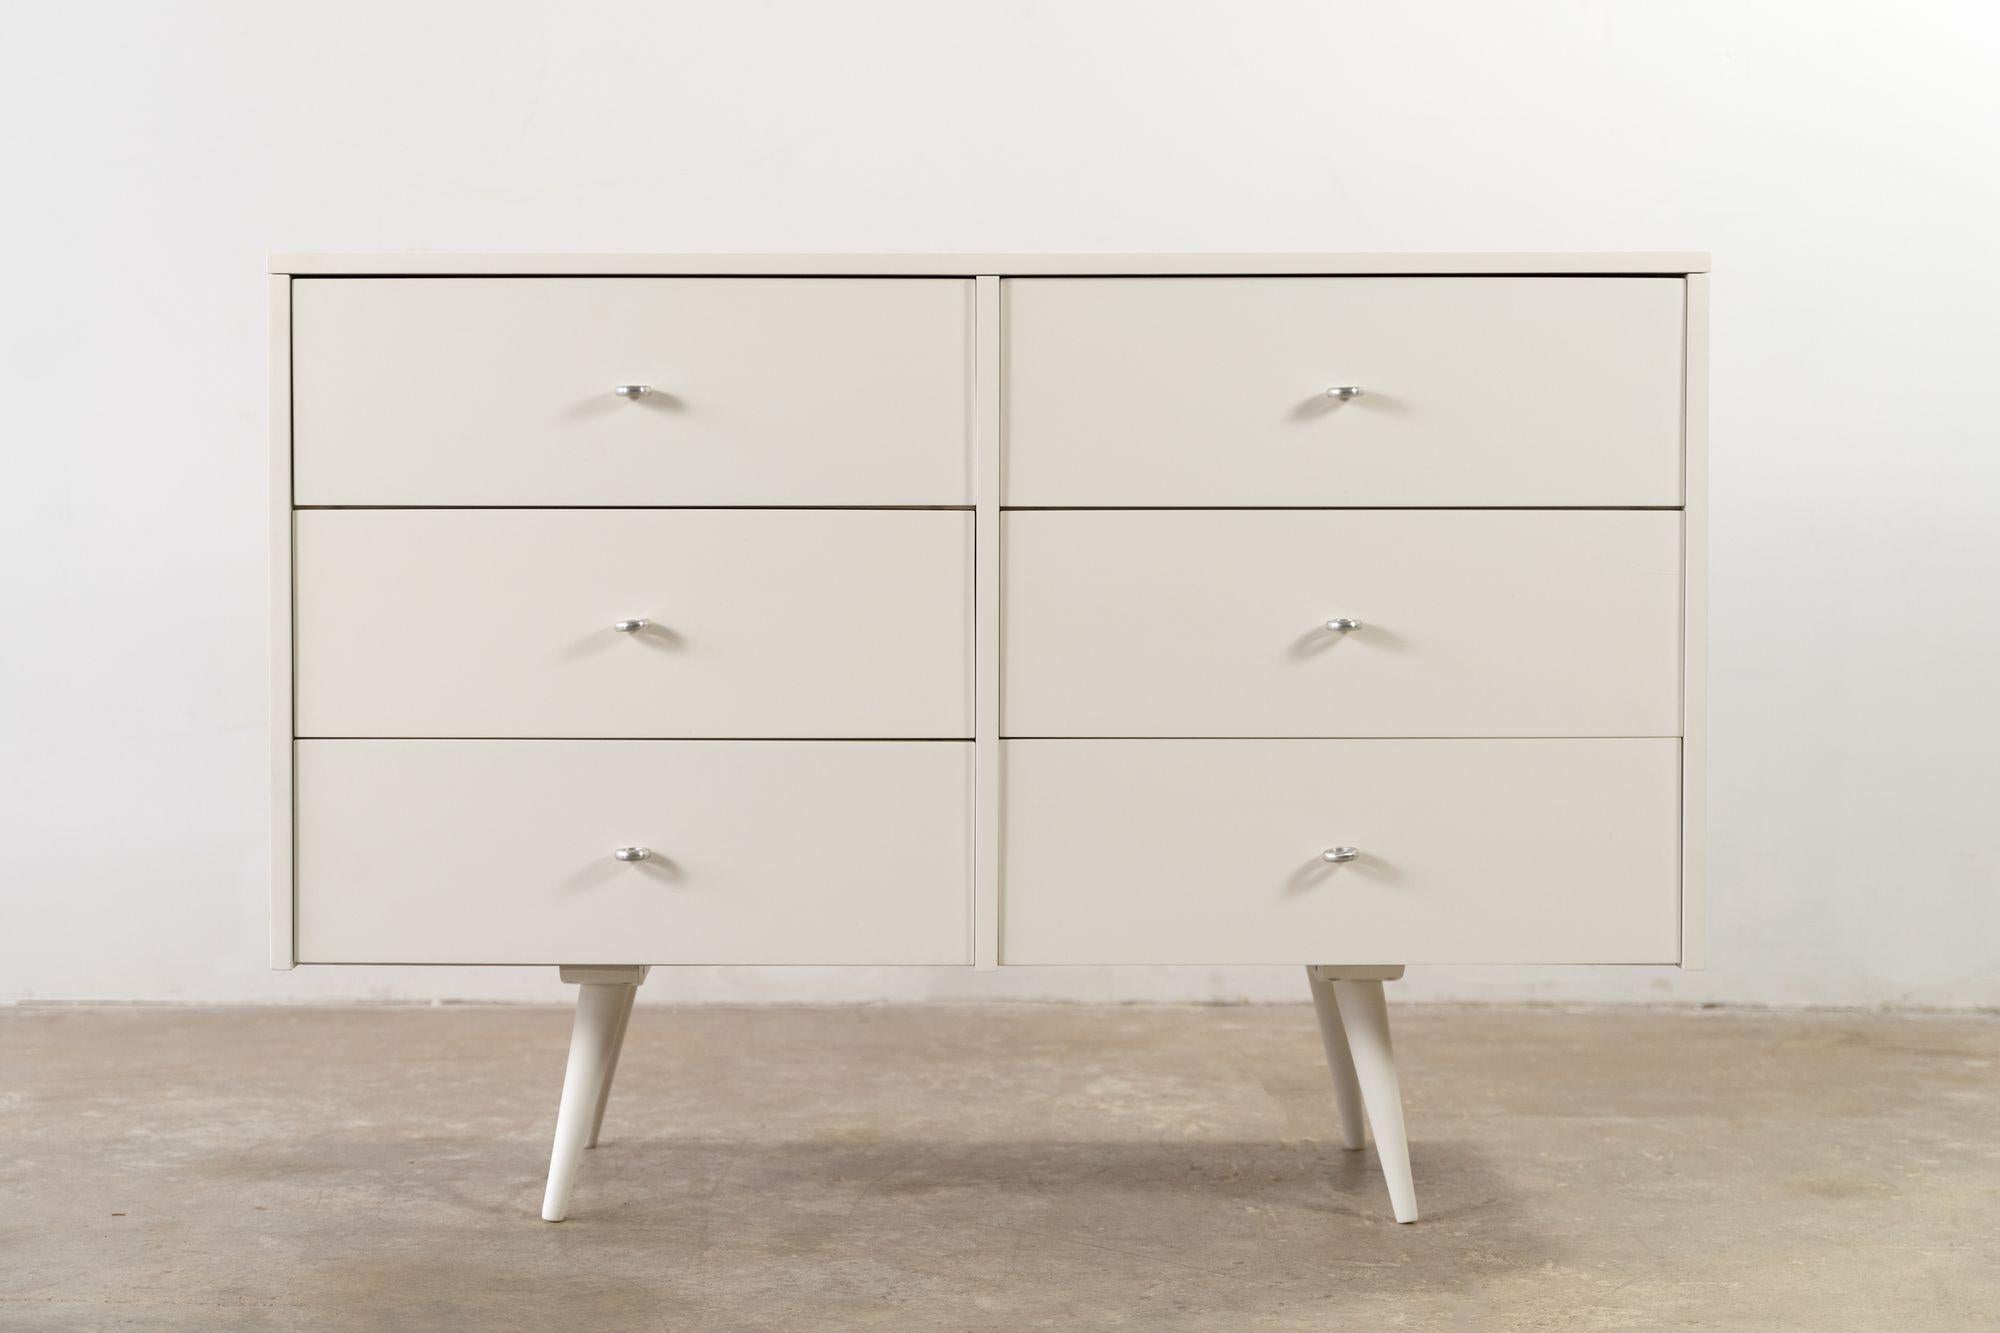 Six-drawer dresser designed by Paul McCobb for the Planner Group Collection and produced by Winchendon in the 1950s. This piece is crafted from solid maple hardwood, is finished in an elegant white lacquer, and retains the original aluminum ring